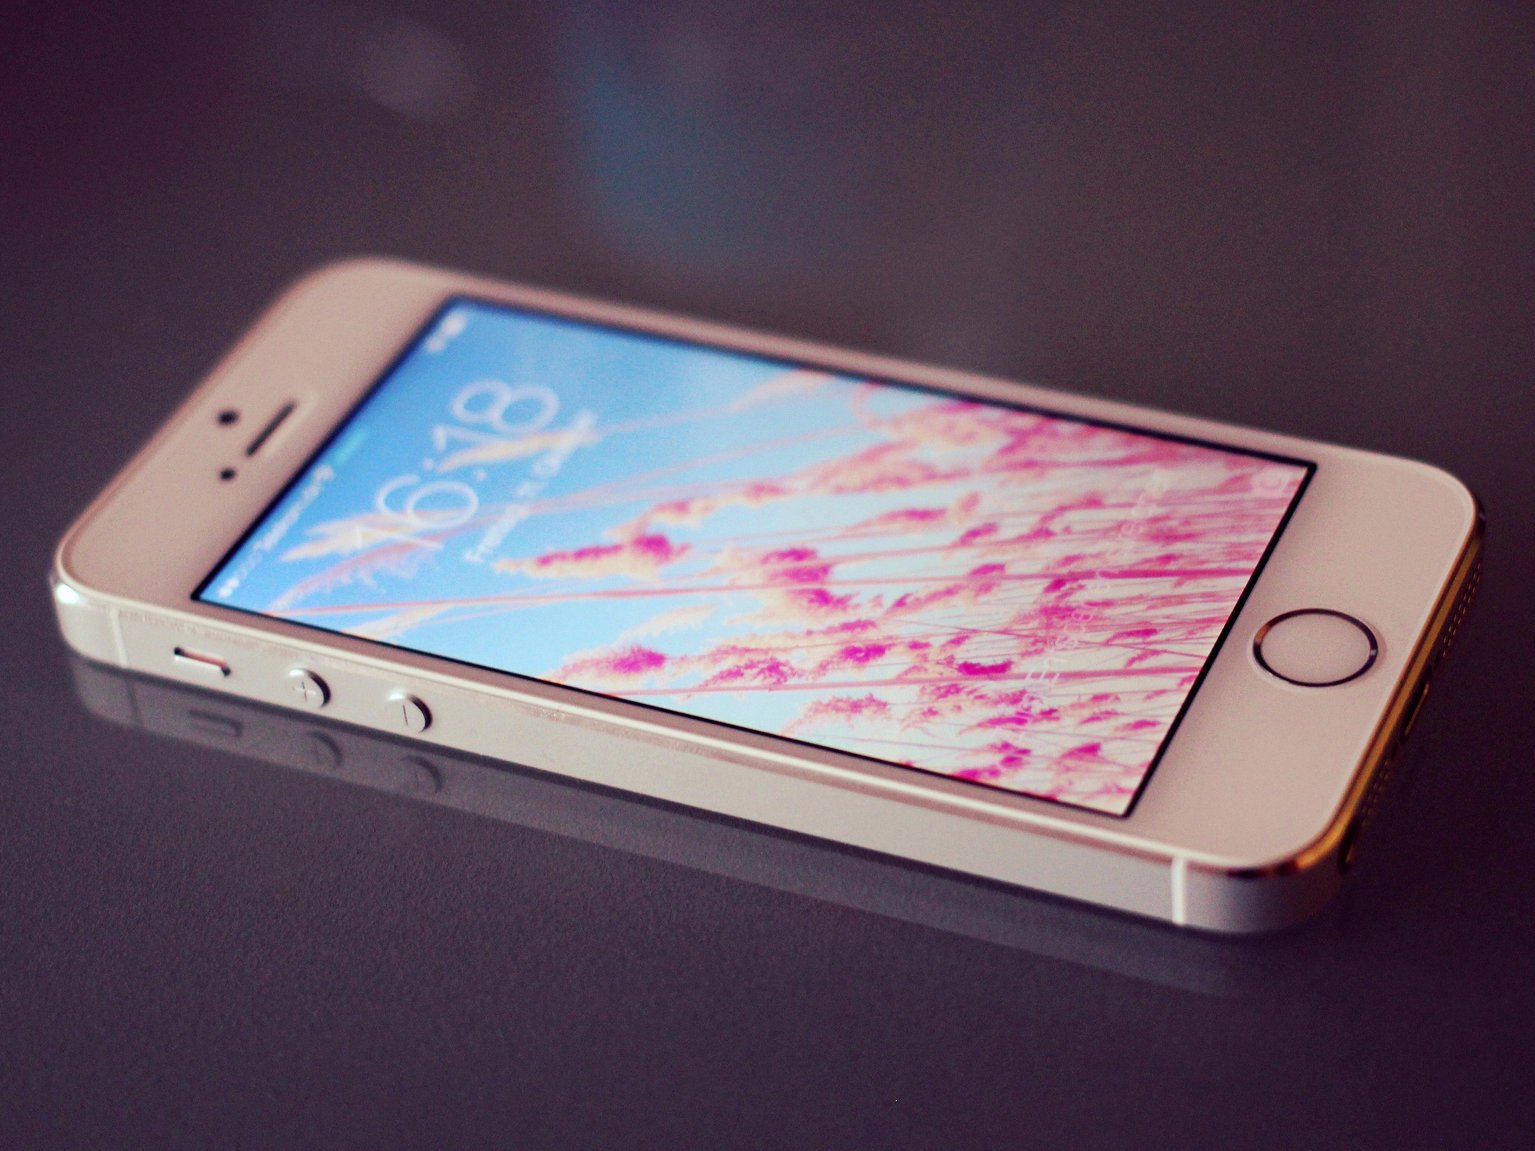 Apple is likely to launch a 4-inch version of the iPhone 6